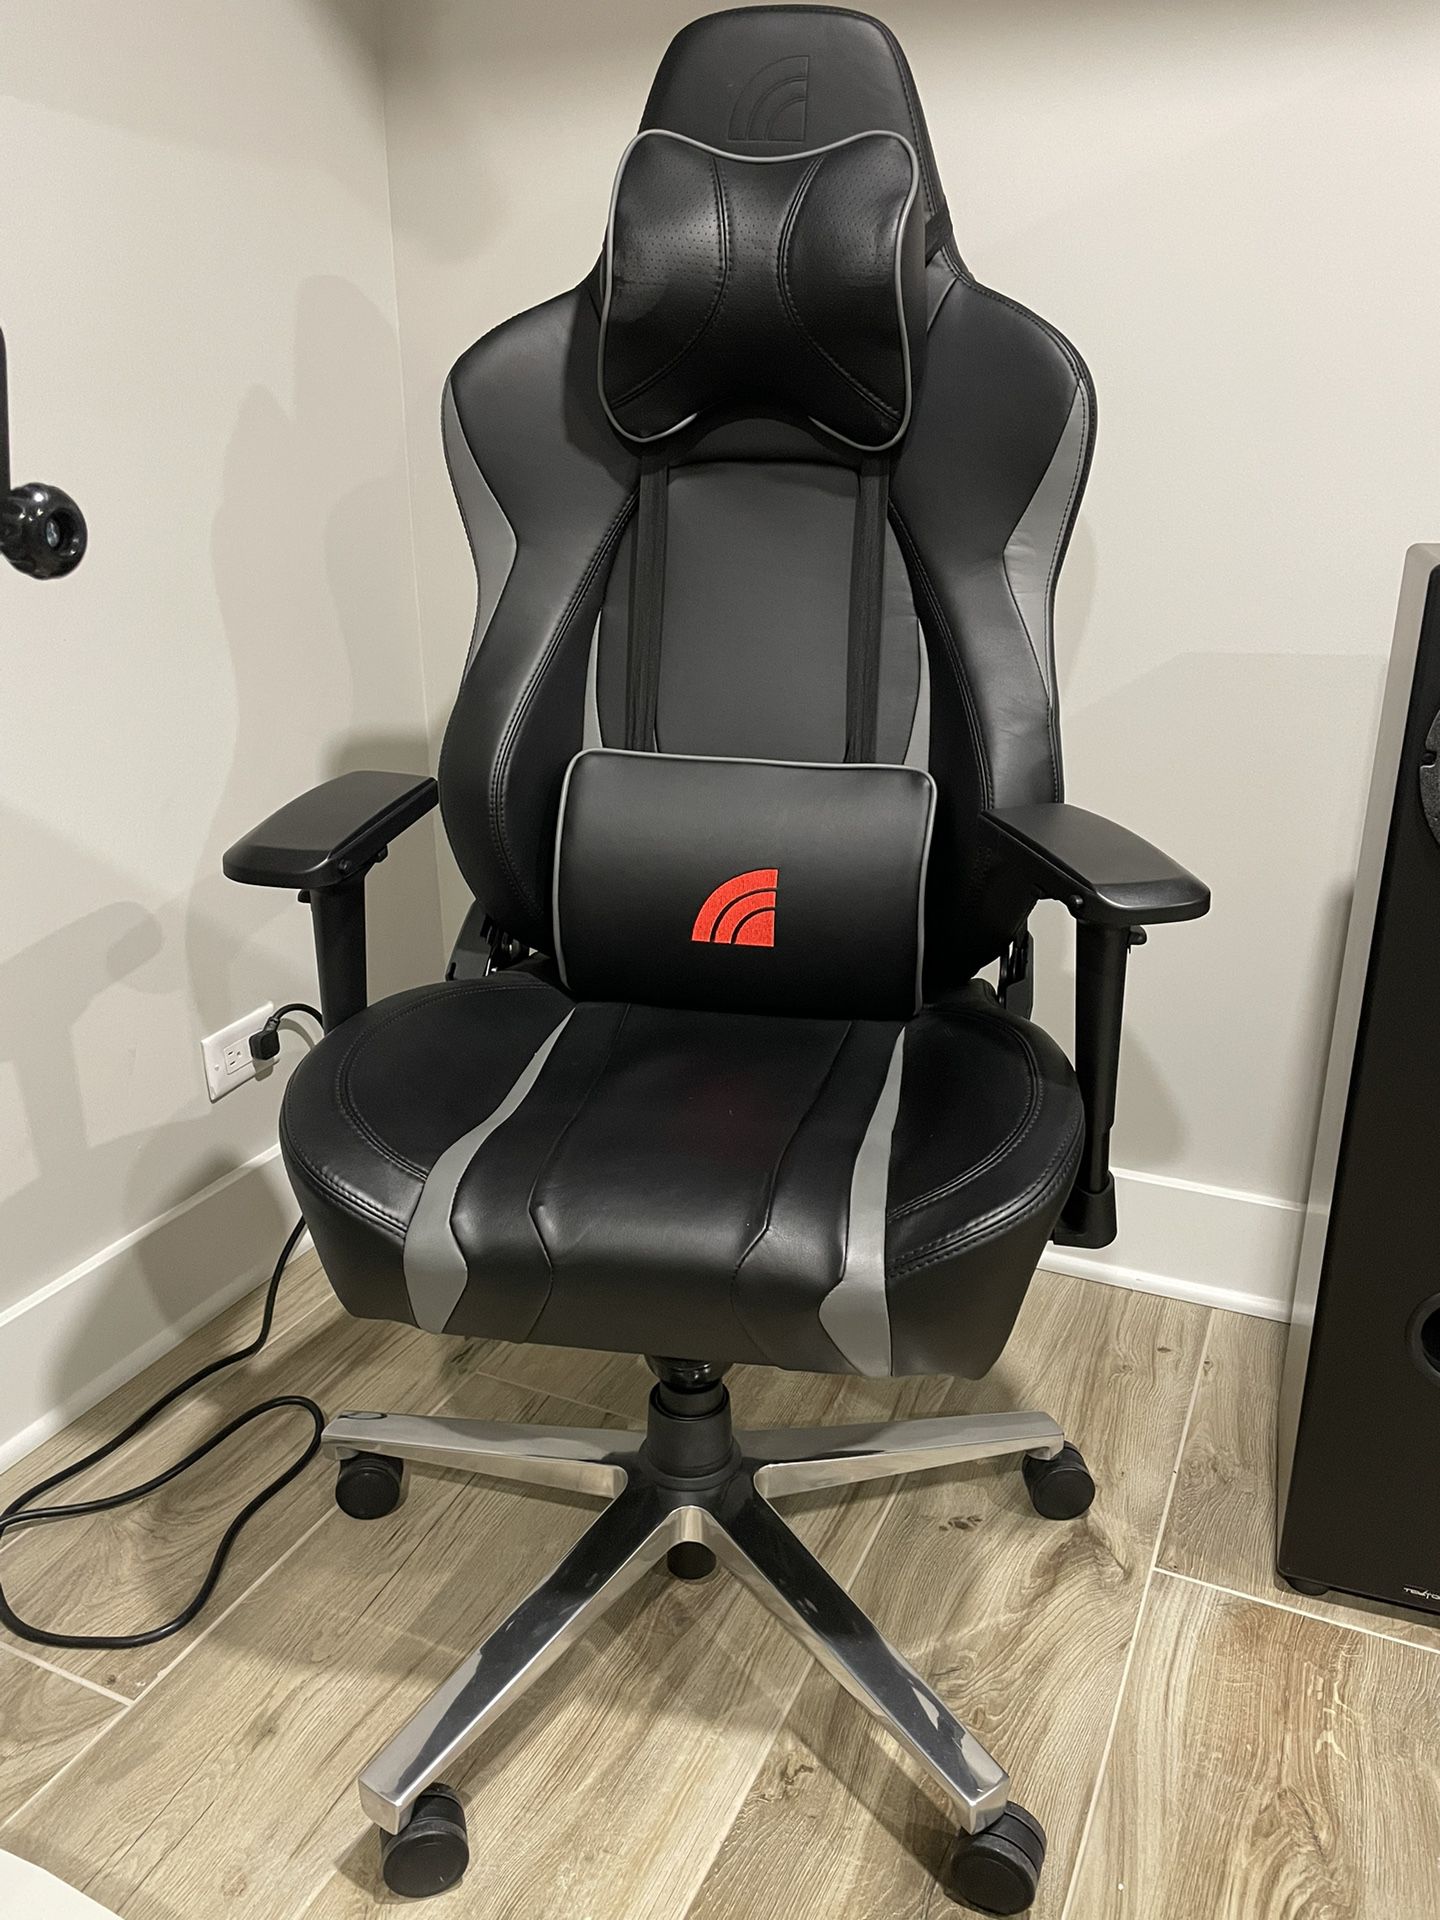 Inland Gaming Chair - Heavy Duty! 